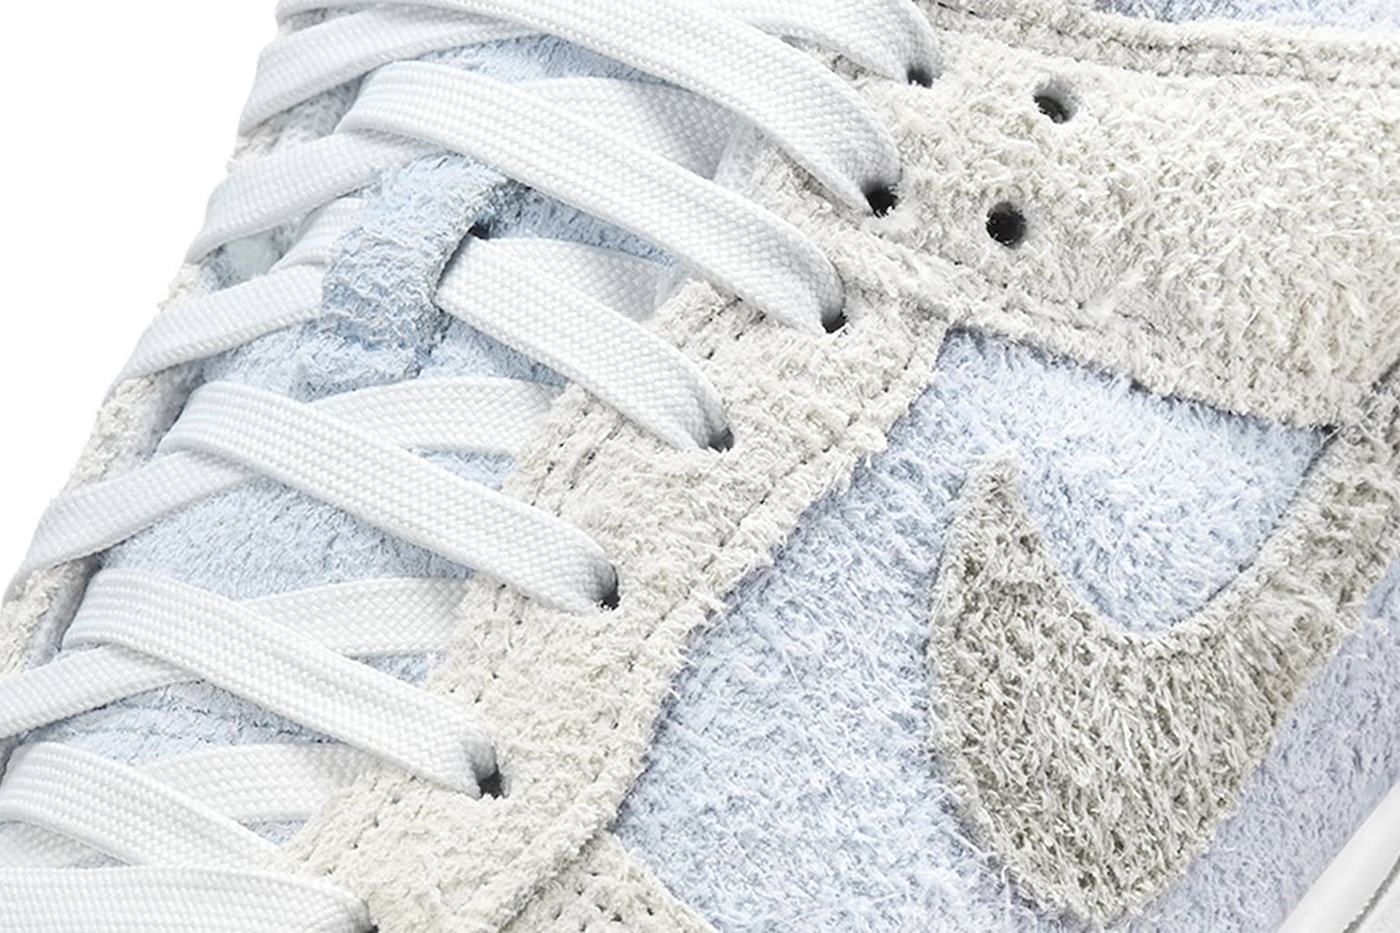 Official Look At the Nike Dunk Low "Photon Dust/Light Armory Blue" suede fuzzy textured swoosh low top sneaker FZ3779-025 Photon Dust/Light Smoke Grey-Light Armory Blue